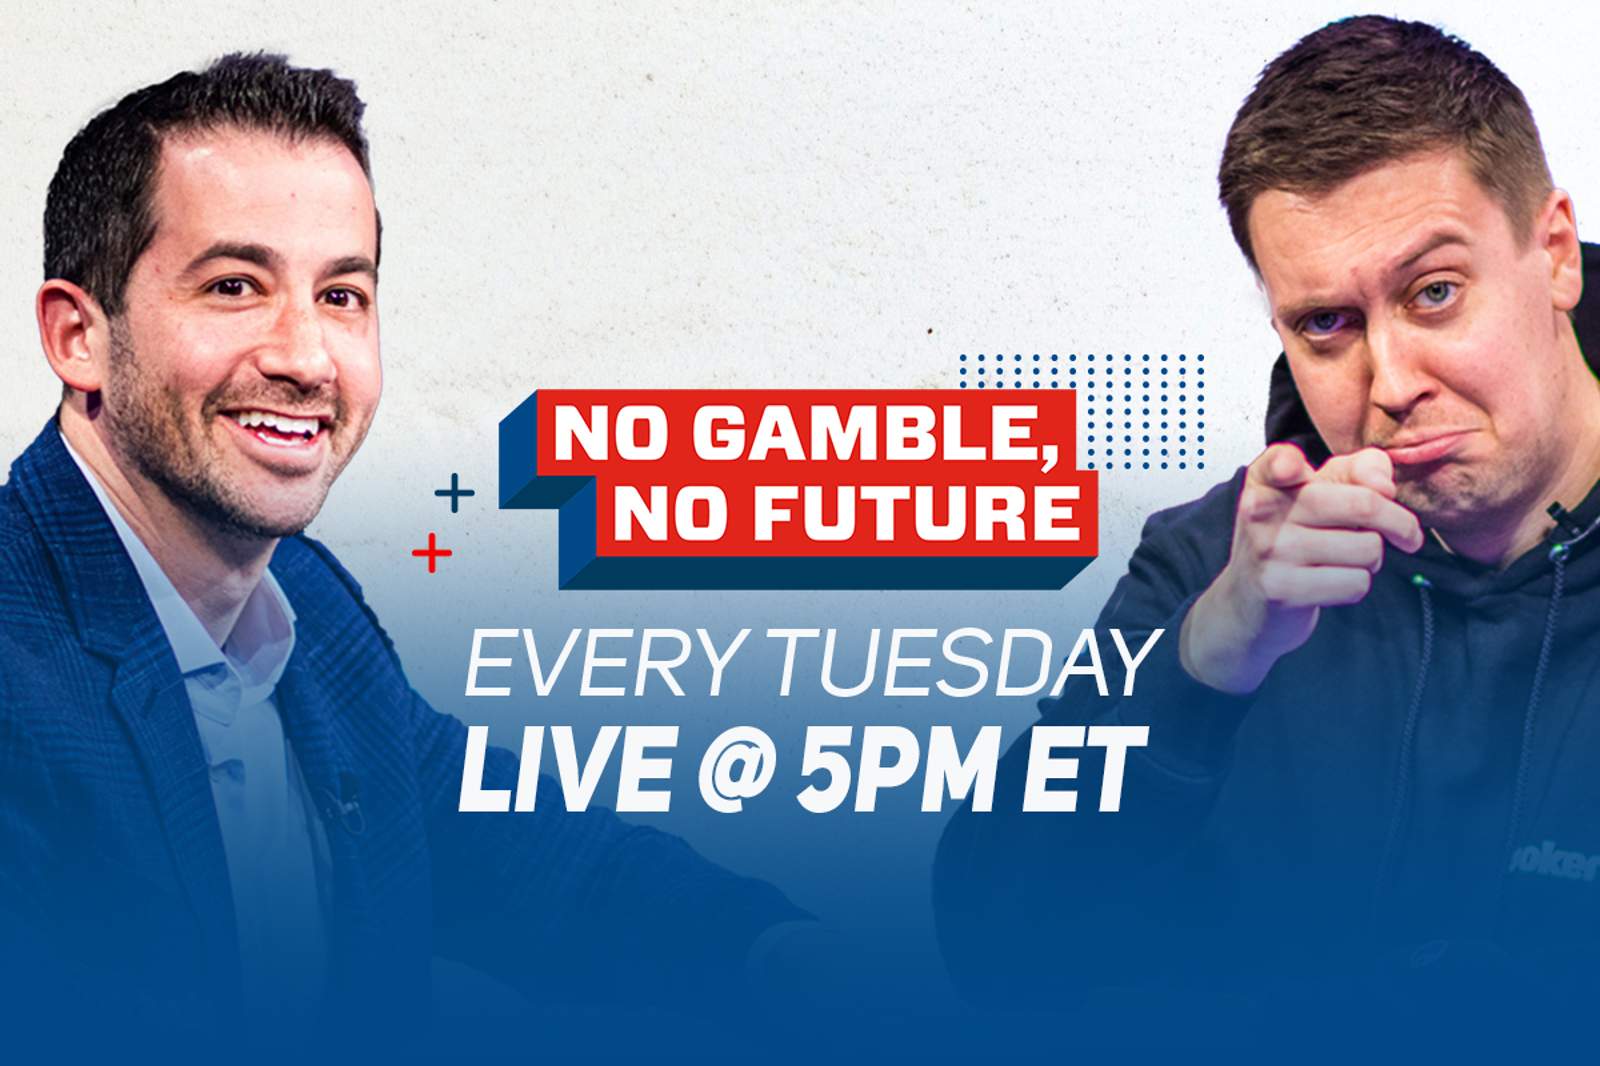 No Gamble, No Future Episode 4 on Today at 5 p.m. ET